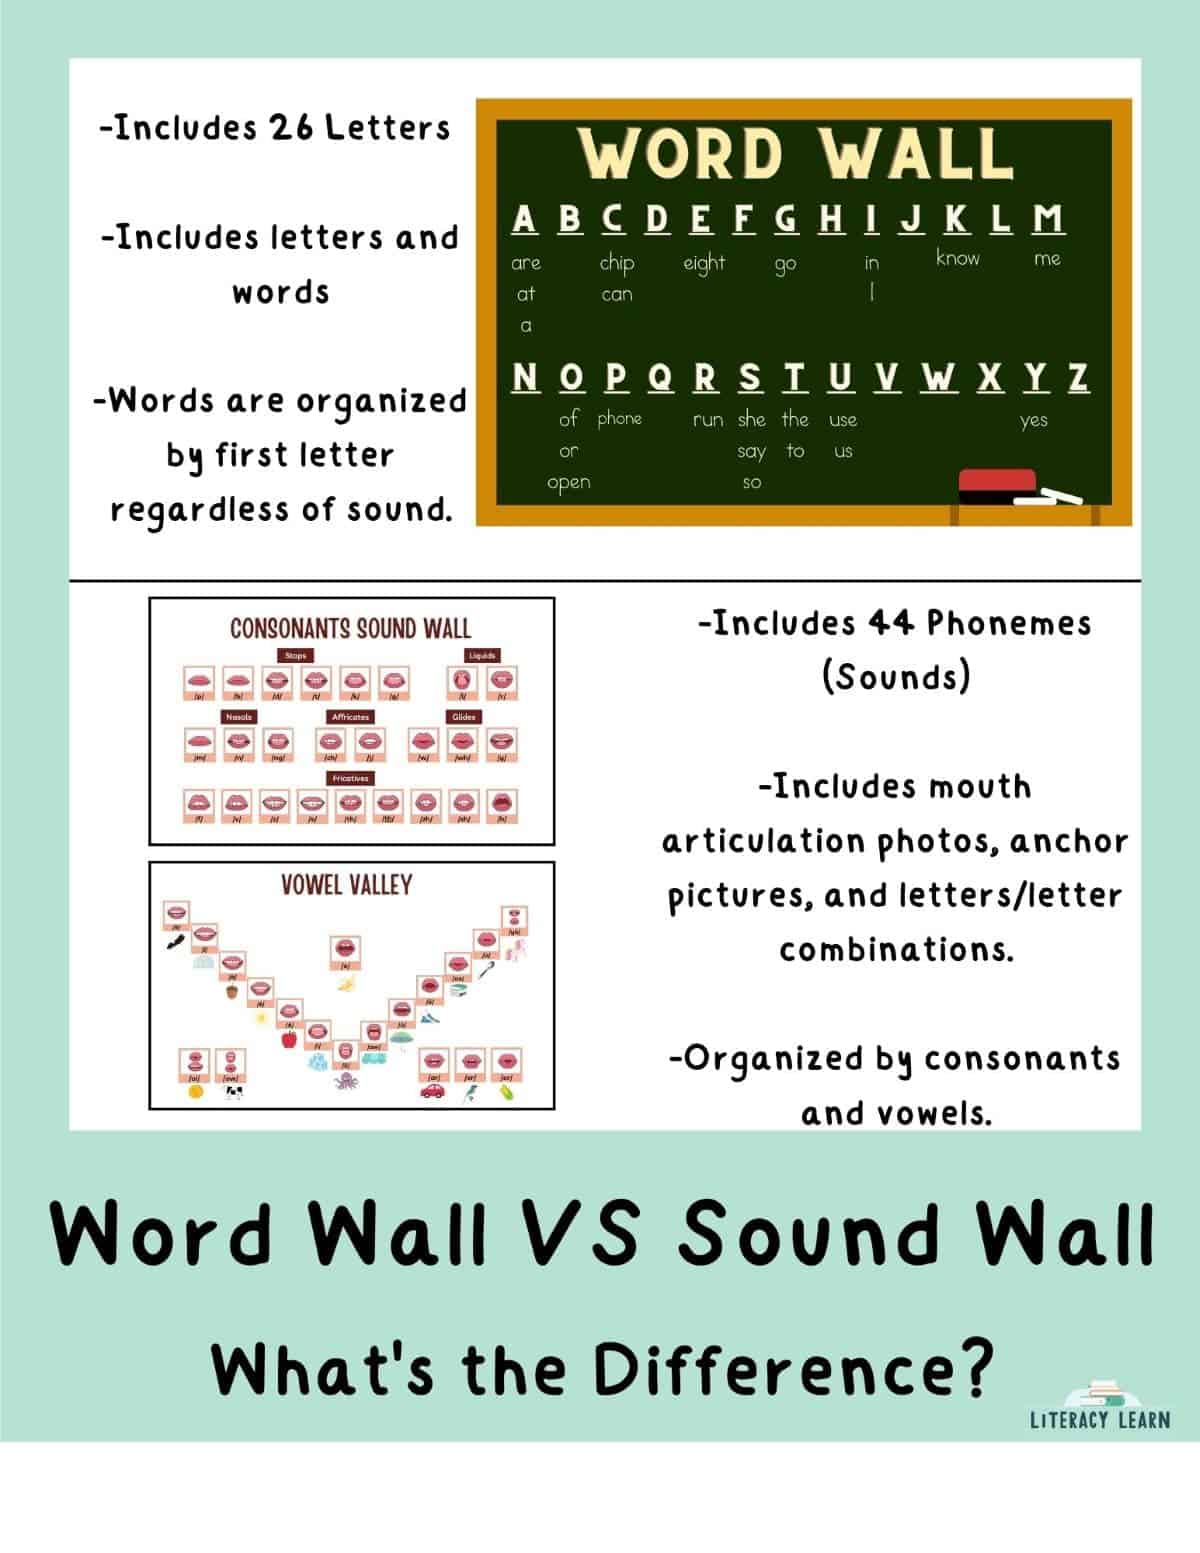 Visual showing the difference between word and sound walls with pictures and descriptions